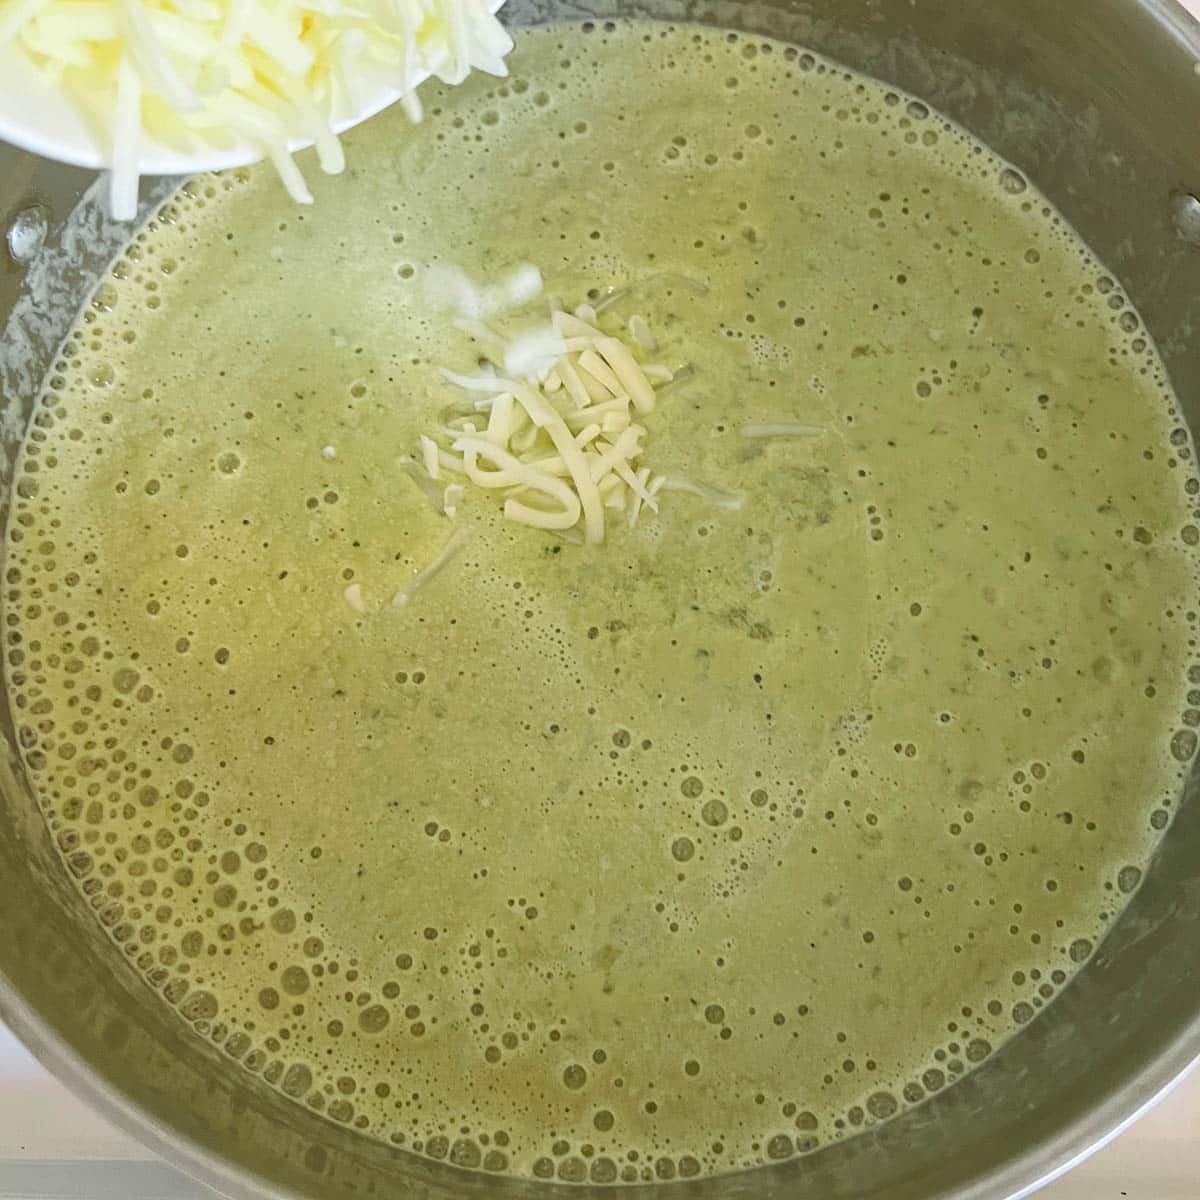 cheese being added to blended cream of jalapeno soup